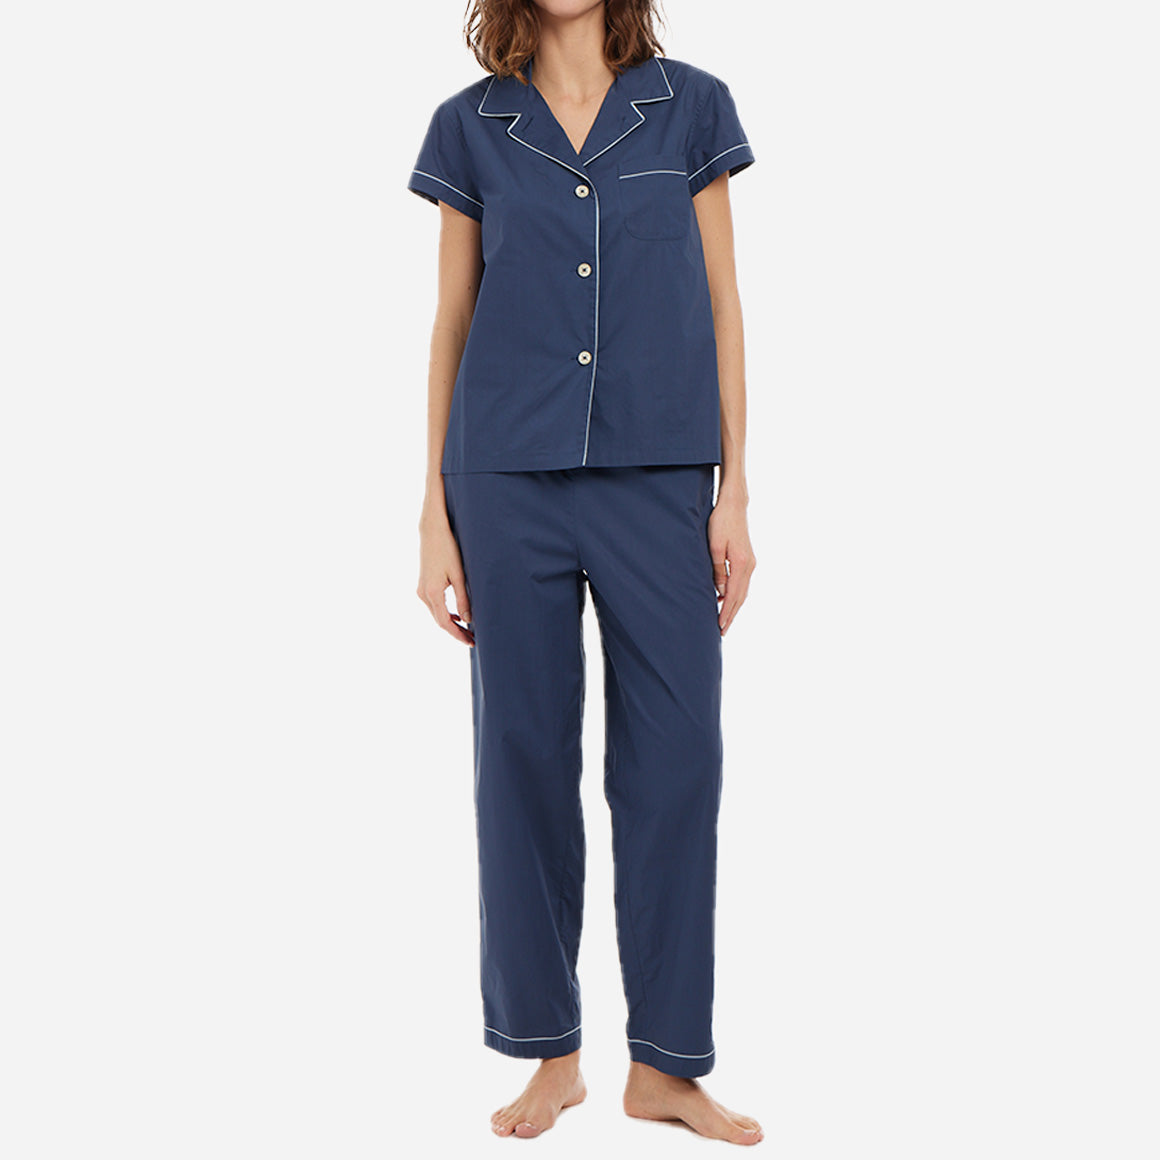 Dark blue short sleeve button-up top with matching full-length pants on a female model.